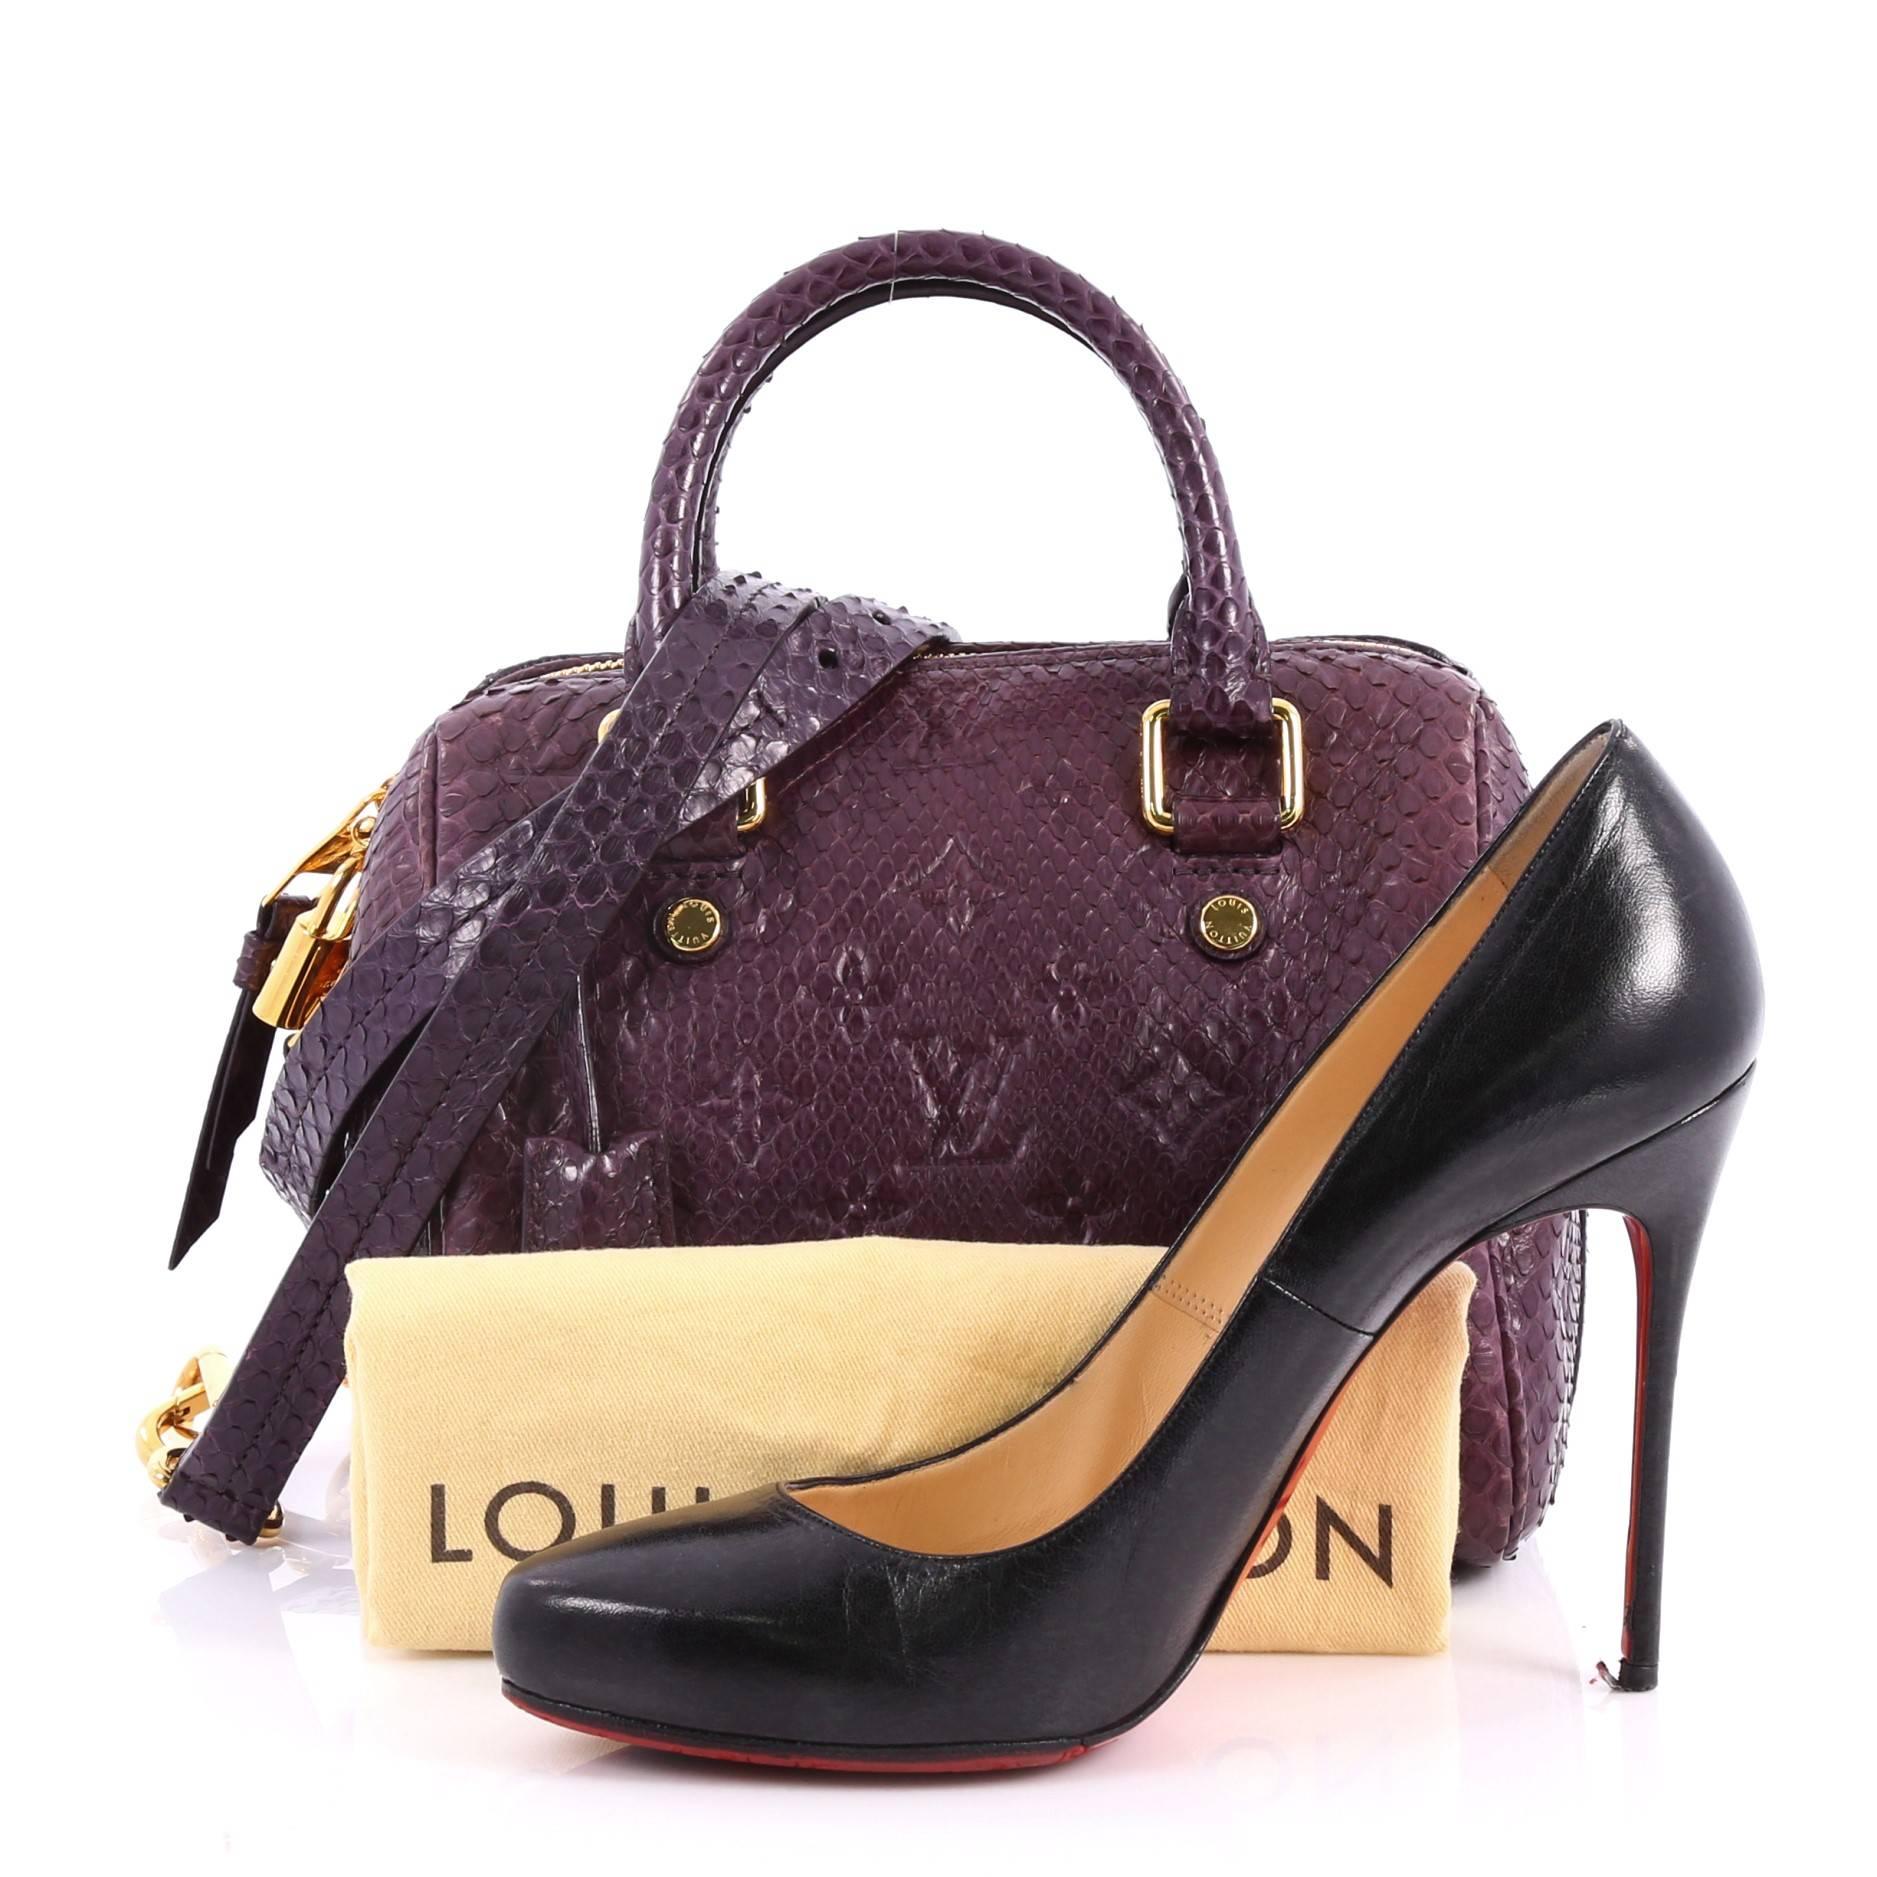 This authentic Louis Vuitton Speedy Bandouliere Bag Monogram Embossed Python 20 is a modern must-have. Constructed from luxurious purple monogram embossed python skin, this iconic and re-imagined Speedy features dual-rolled leather handles, and